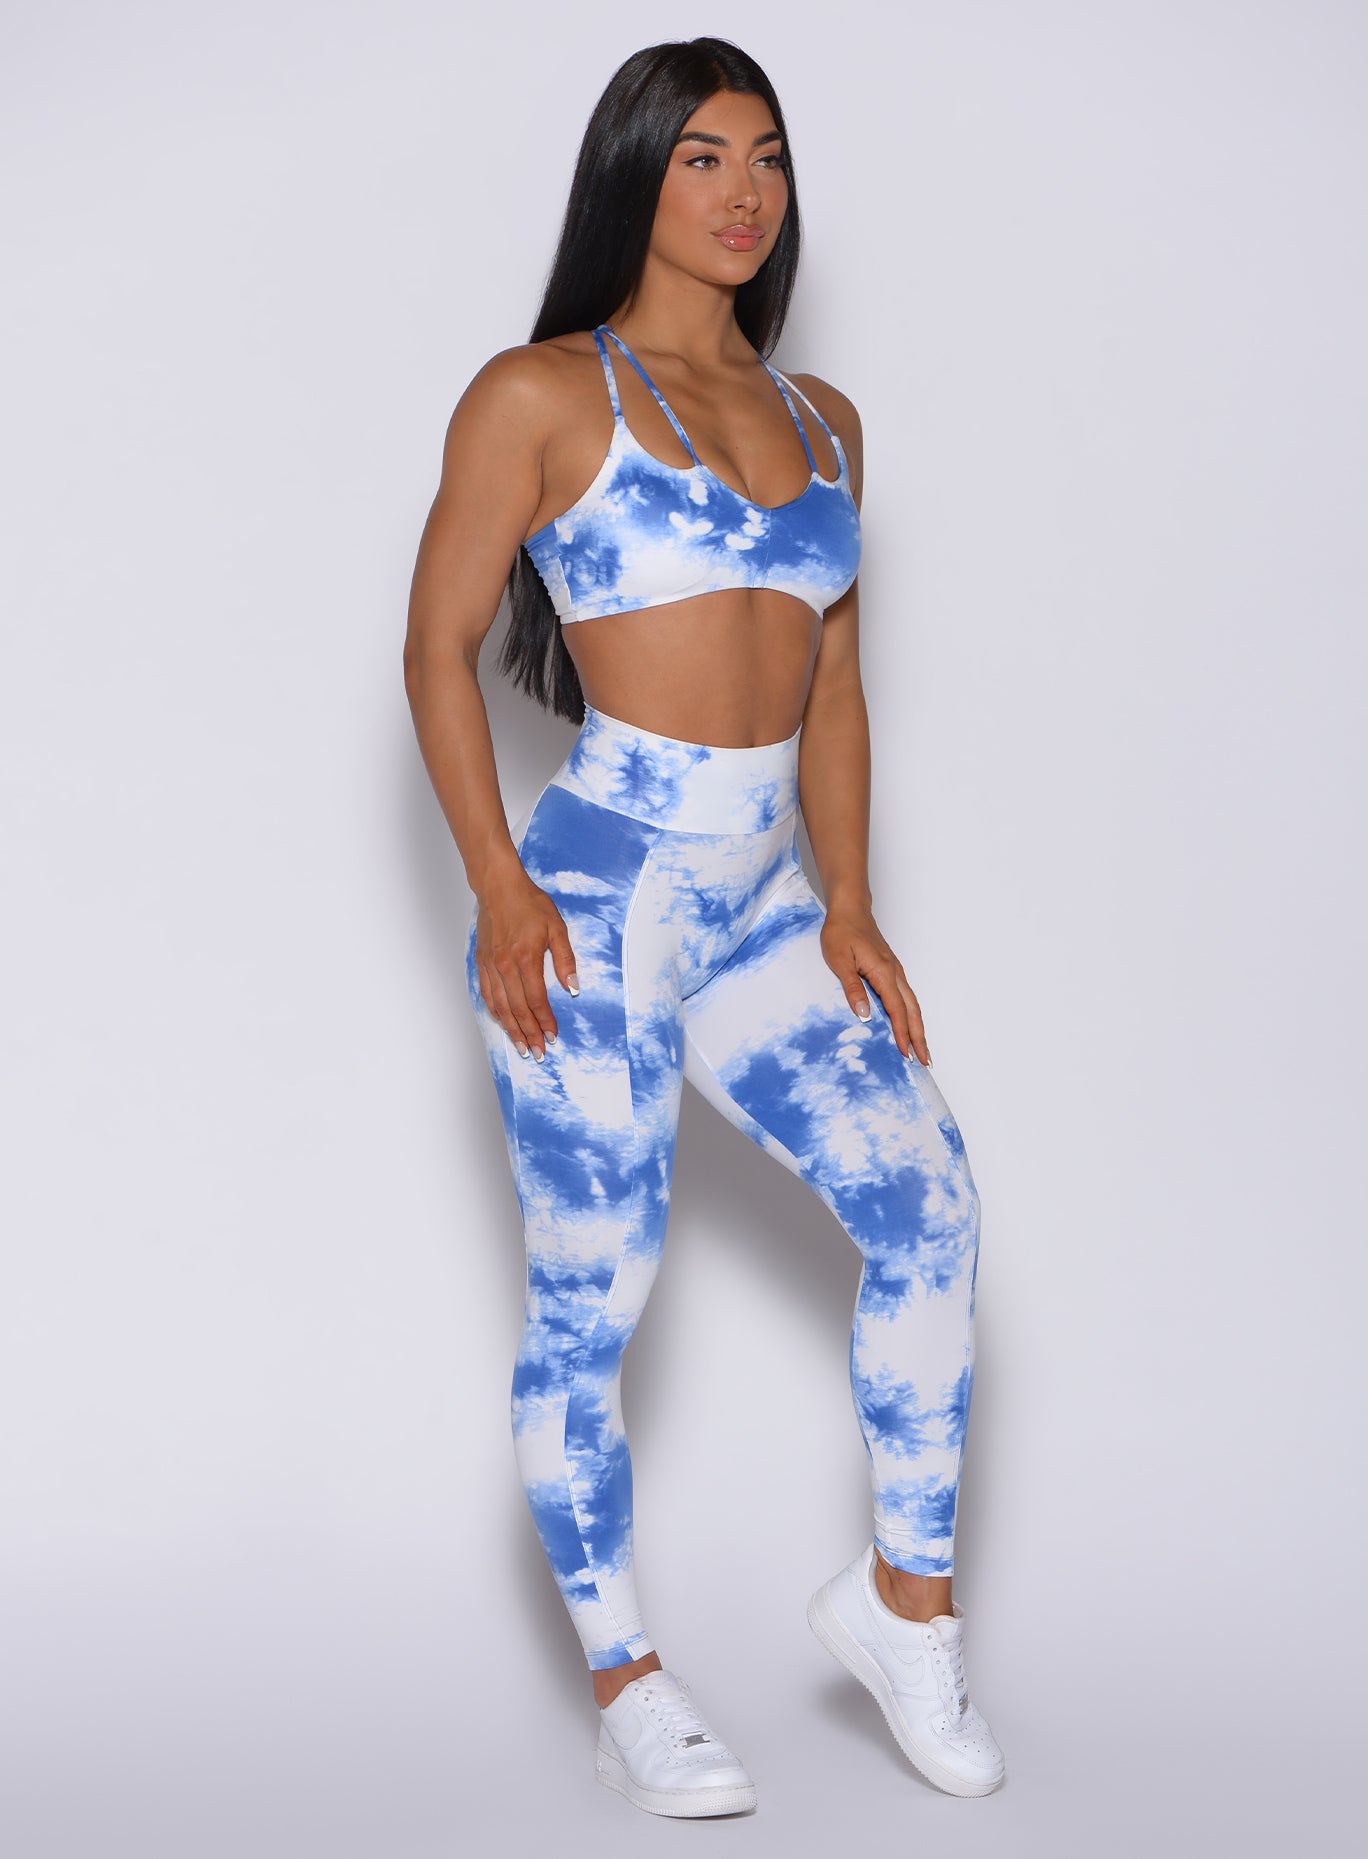 Right side profile view of a model angled slightly to her right wearing our tie dye peach booty leggings in blue white and a matching bra